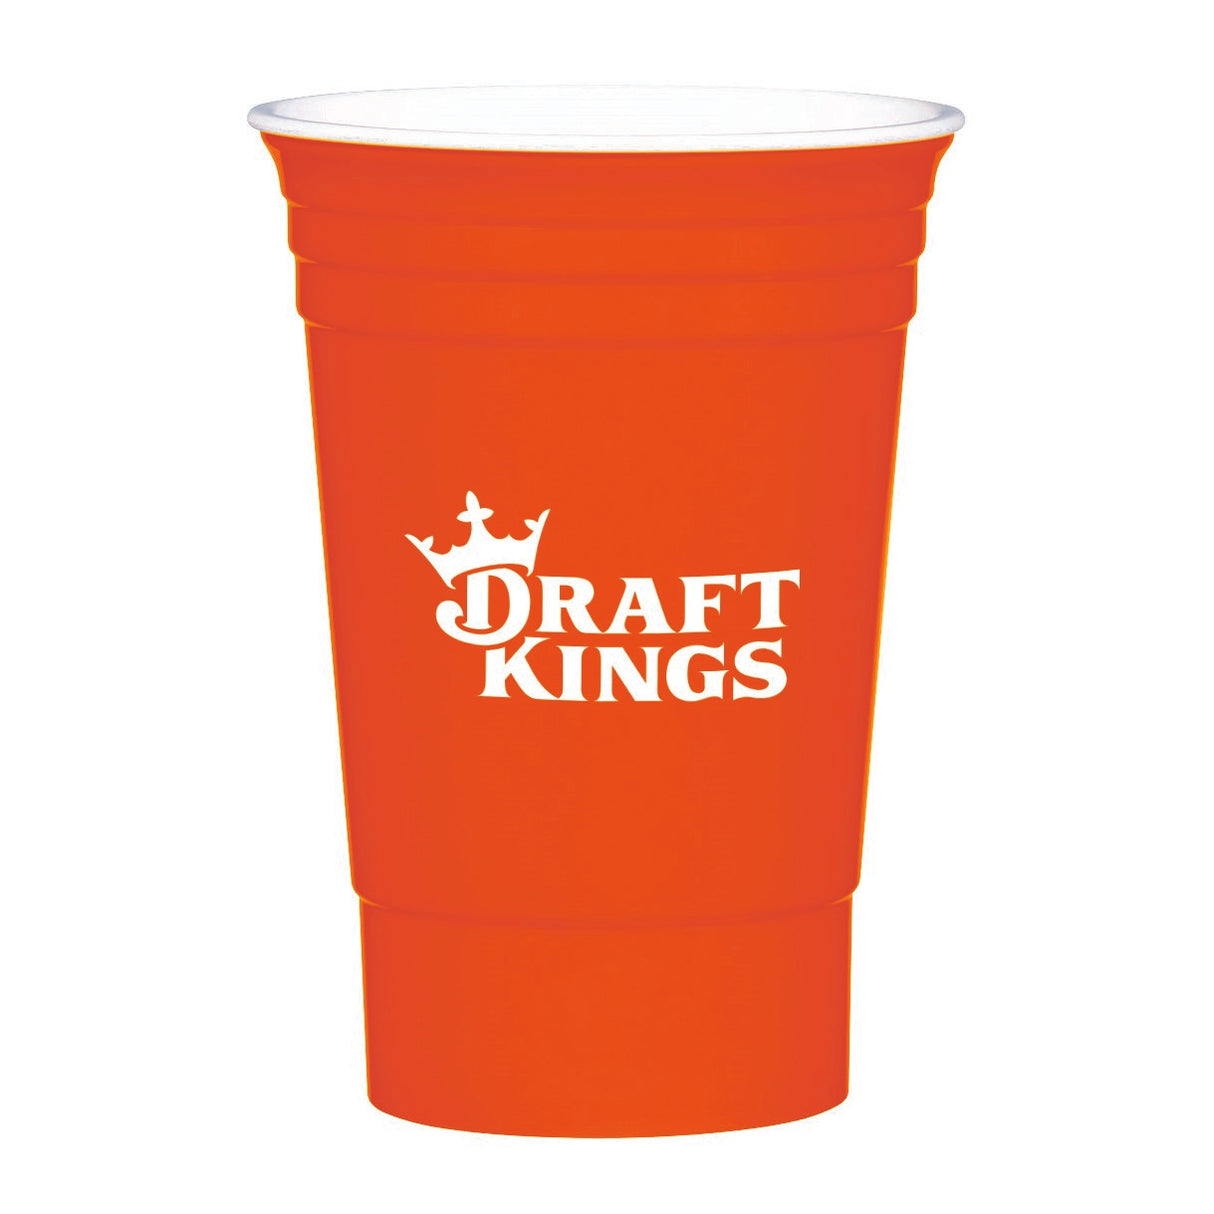 The DraftKings Party Cup®